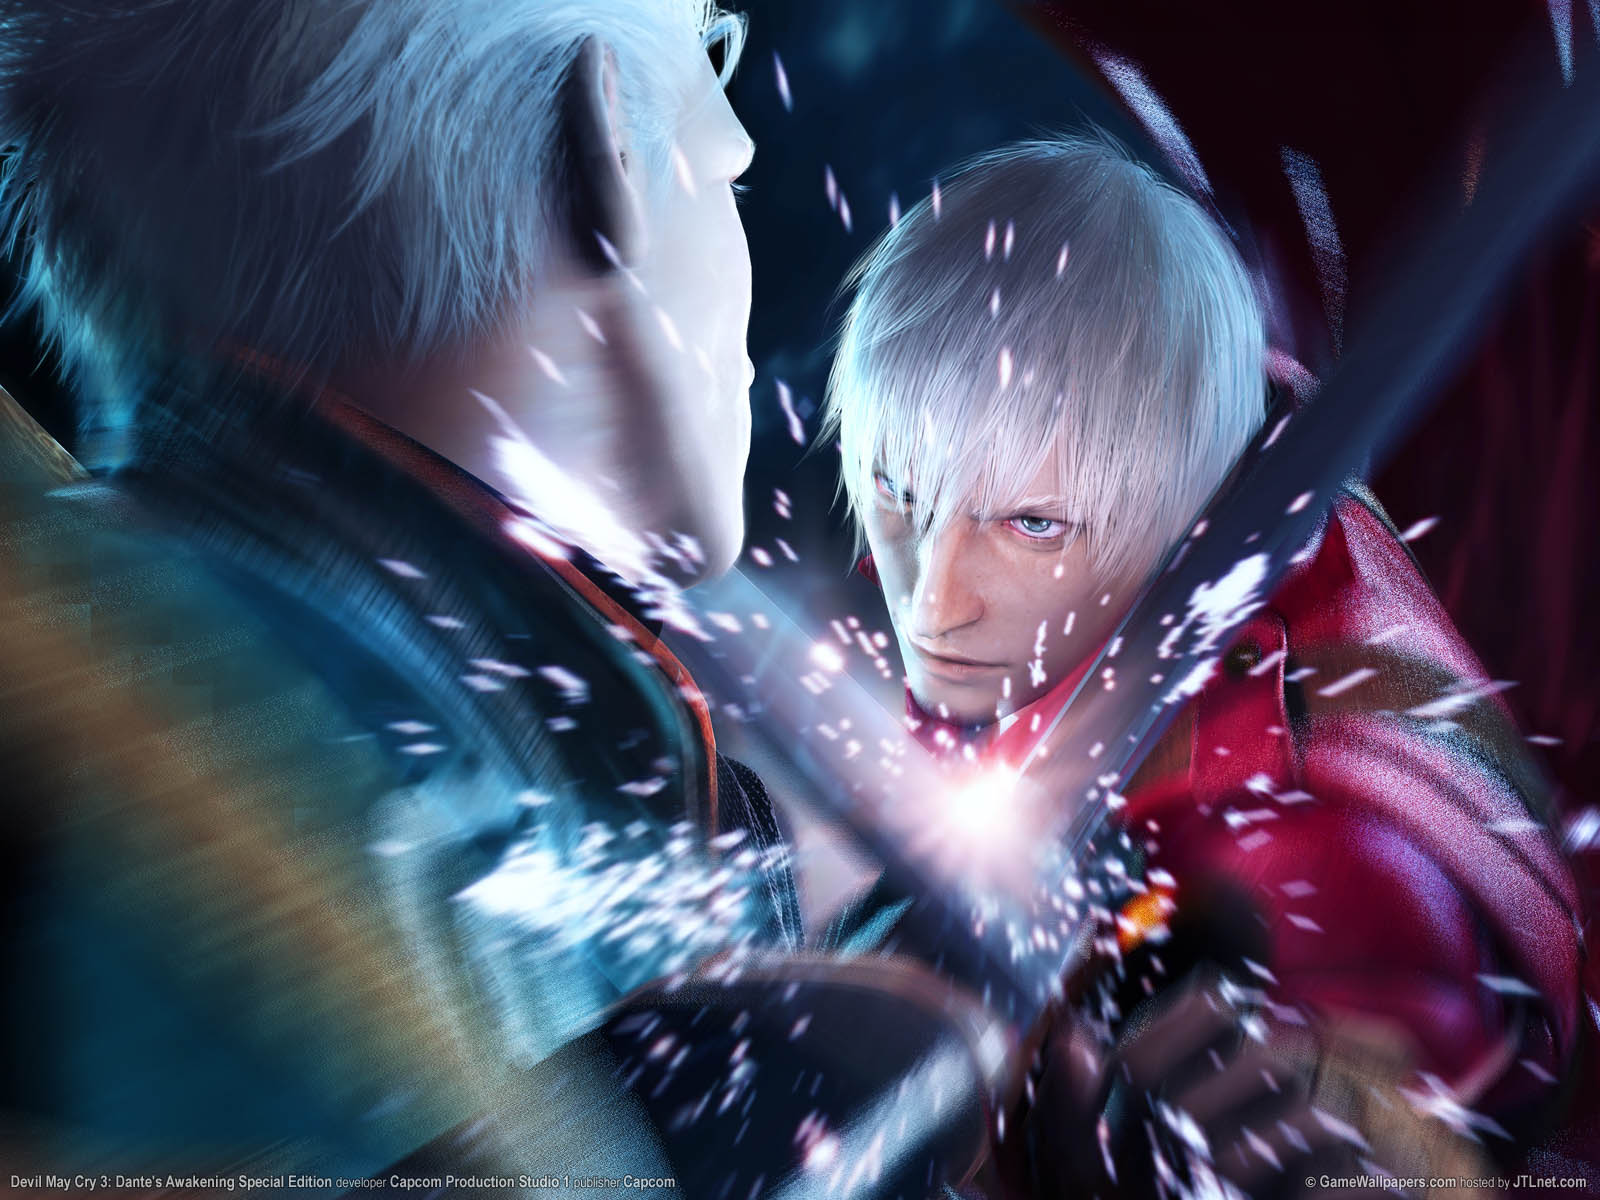 Devil May Cry 3%3A Dante%5C%27s Awakening Special Edition wallpaper 01 1600x1200